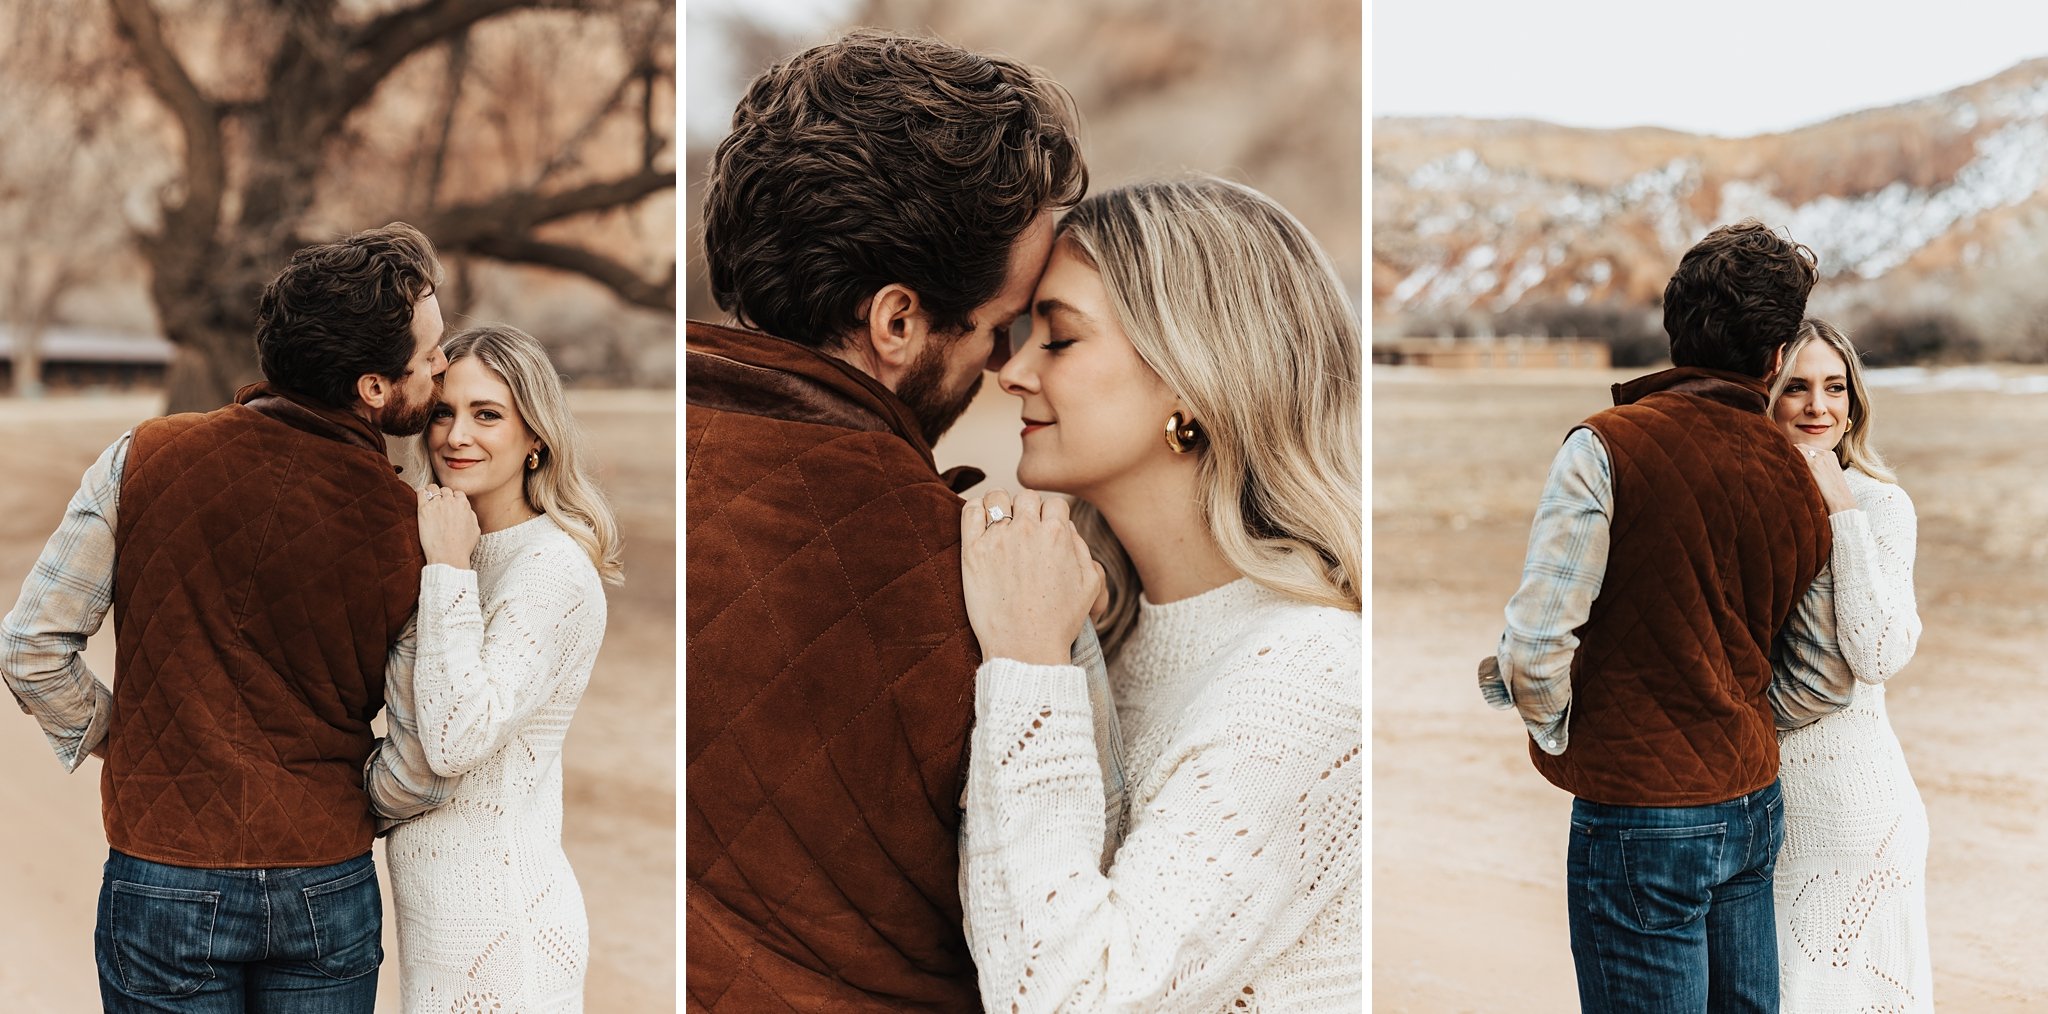 Alicia+lucia+photography+-+albuquerque+wedding+photographer+-+santa+fe+wedding+photography+-+new+mexico+wedding+photographer+-+new+mexico+wedding+-+southwest+engagement+-+ghost+ranch+engagement+-+ghost+ranch+wedding_0029.jpg